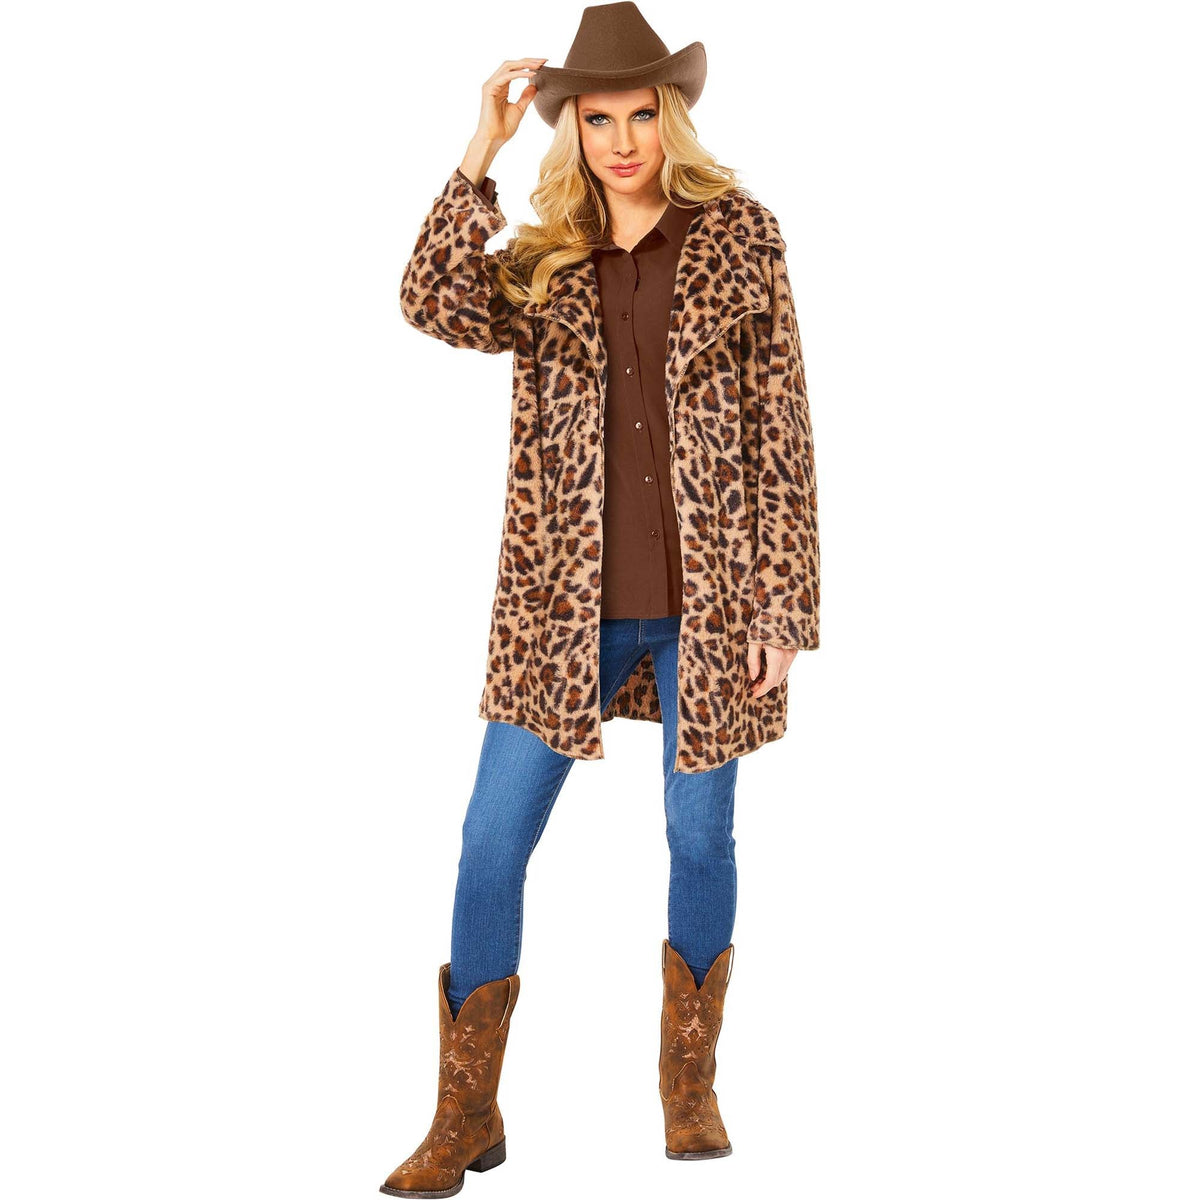 IN SPIRIT DESIGNS Costumes Yellowstone Beth Dutton Costume for Adults, Leopard Coat